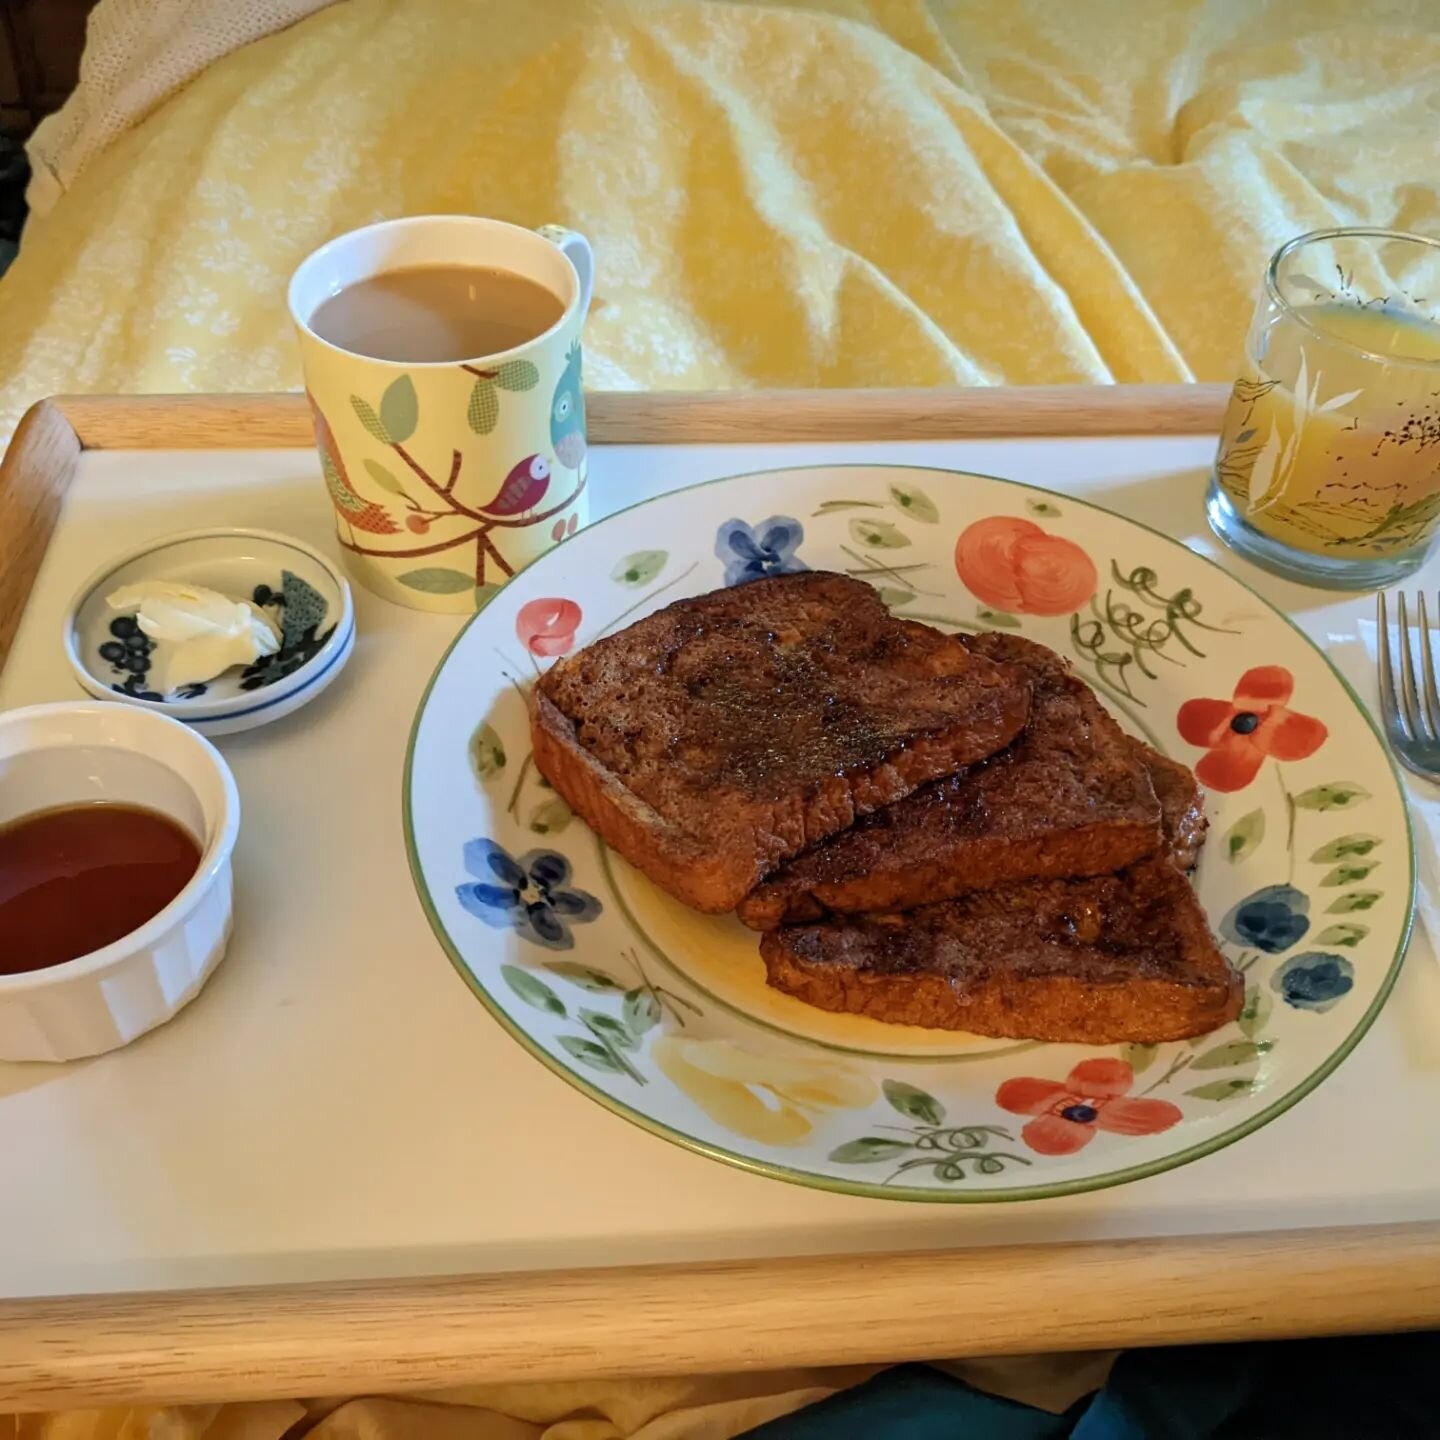 42 is the answer to &quot;what age did I become and get bday French toast breakfast in bed?&quot; 
Delicious food by @nathanlloyd4245
💖😀🥳.
#42 #hitchhikersguidetothegalaxy #hitchhikersguide #frenchtoast #breakfastinbed #birthdaybreakfast #thankful